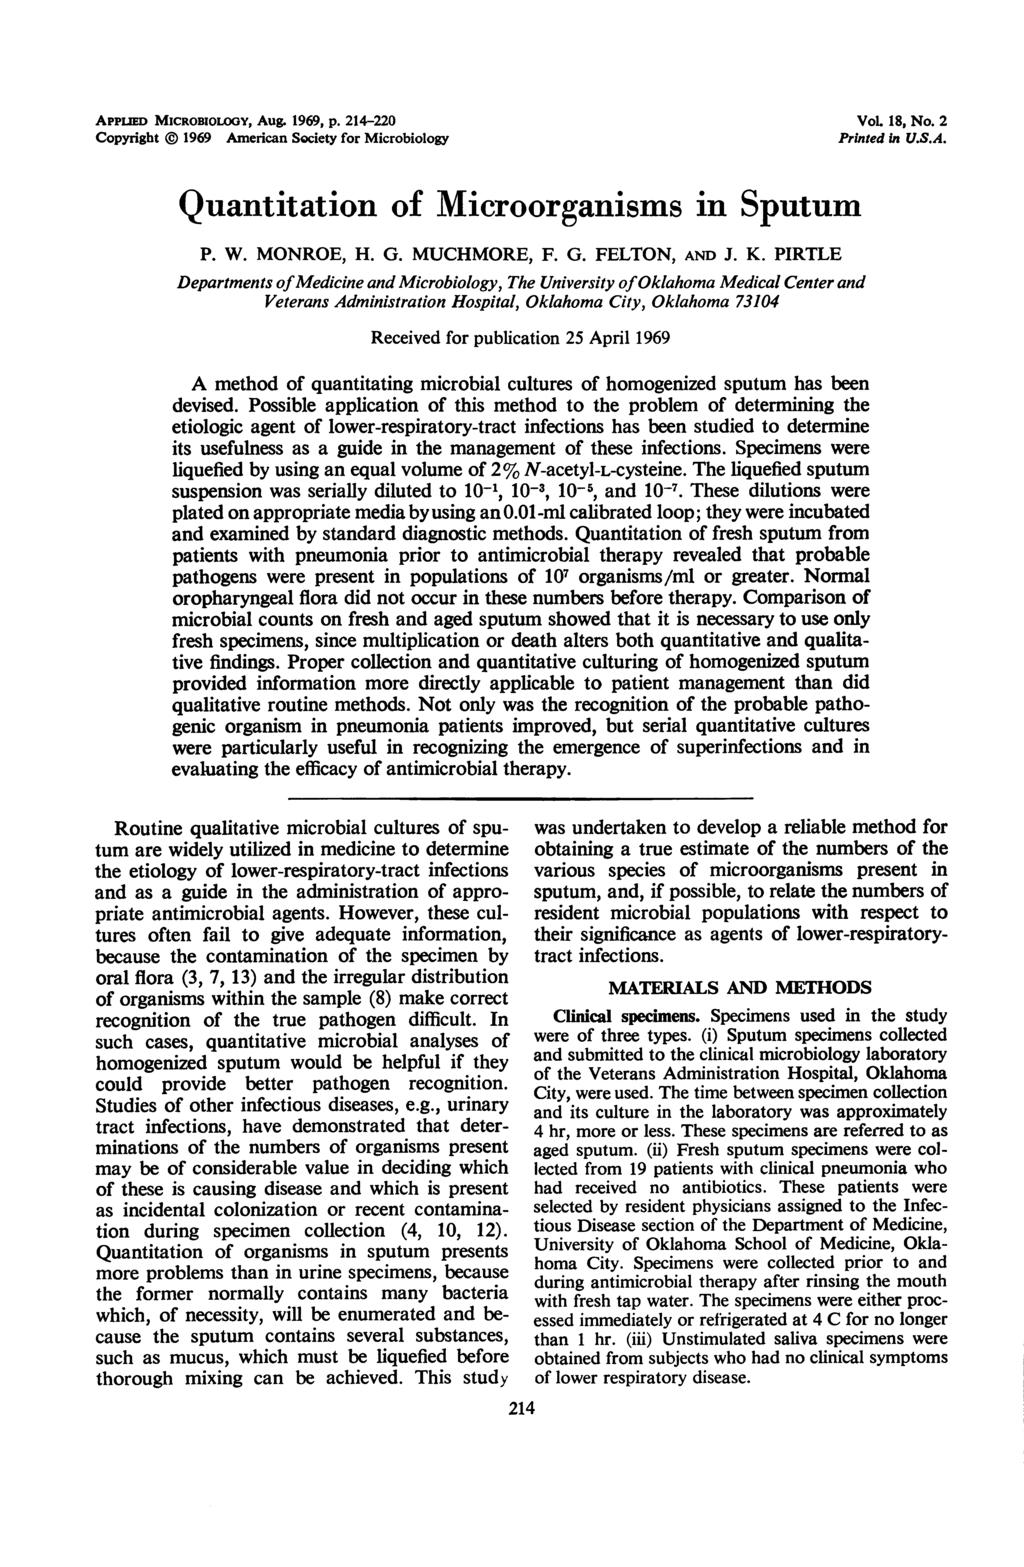 APPTED MICROBIOLOGY, Aug. 1969, p. 214-22 VoL 18, No. 2 Copyright 1969 American Society for Microbiology Printed in U.S.A. Quantitation of Microorganisms in Sputum P. W. MONROE, H. G. MUCHMORE, F. G. FELTON, AND J.